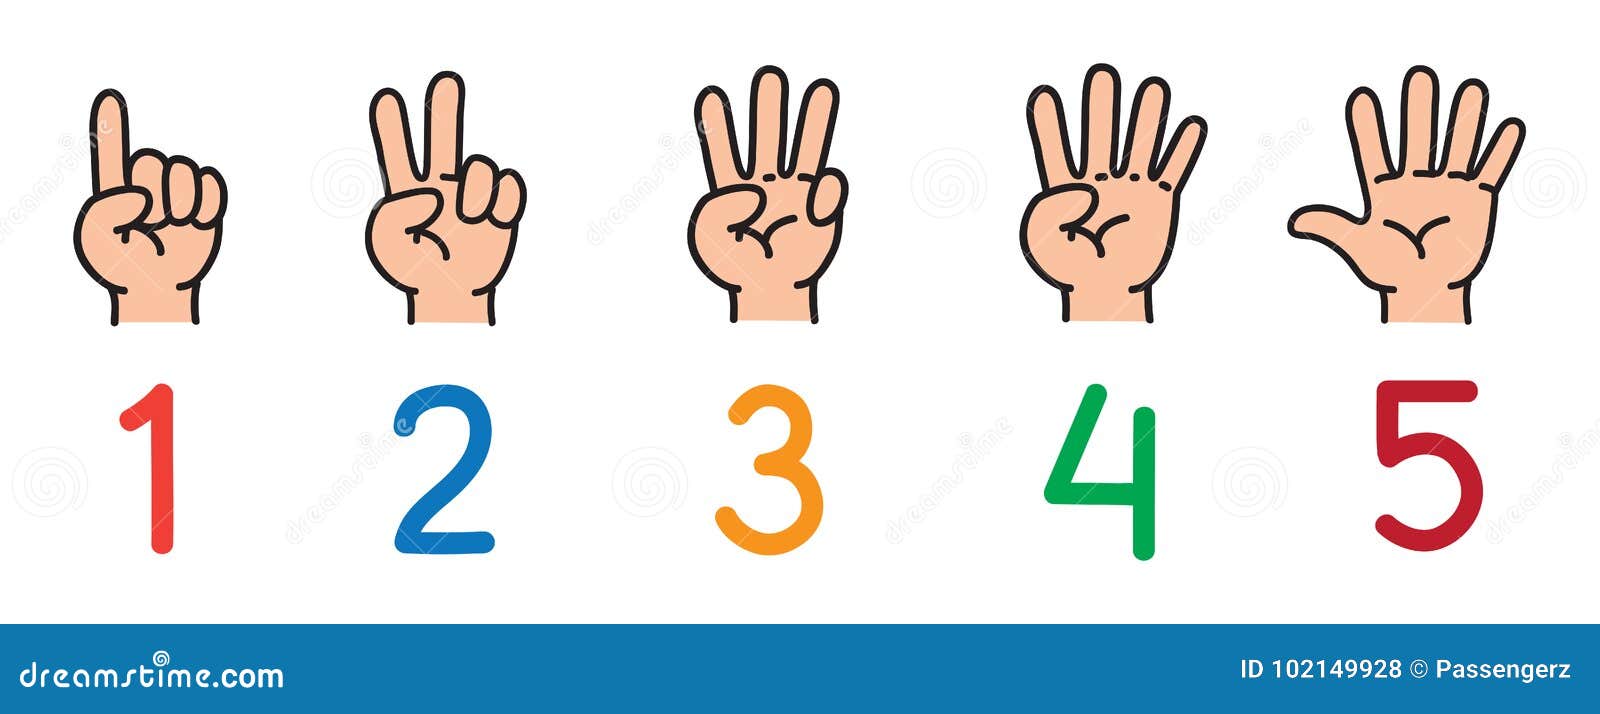 hands with fingers.icon set for counting education